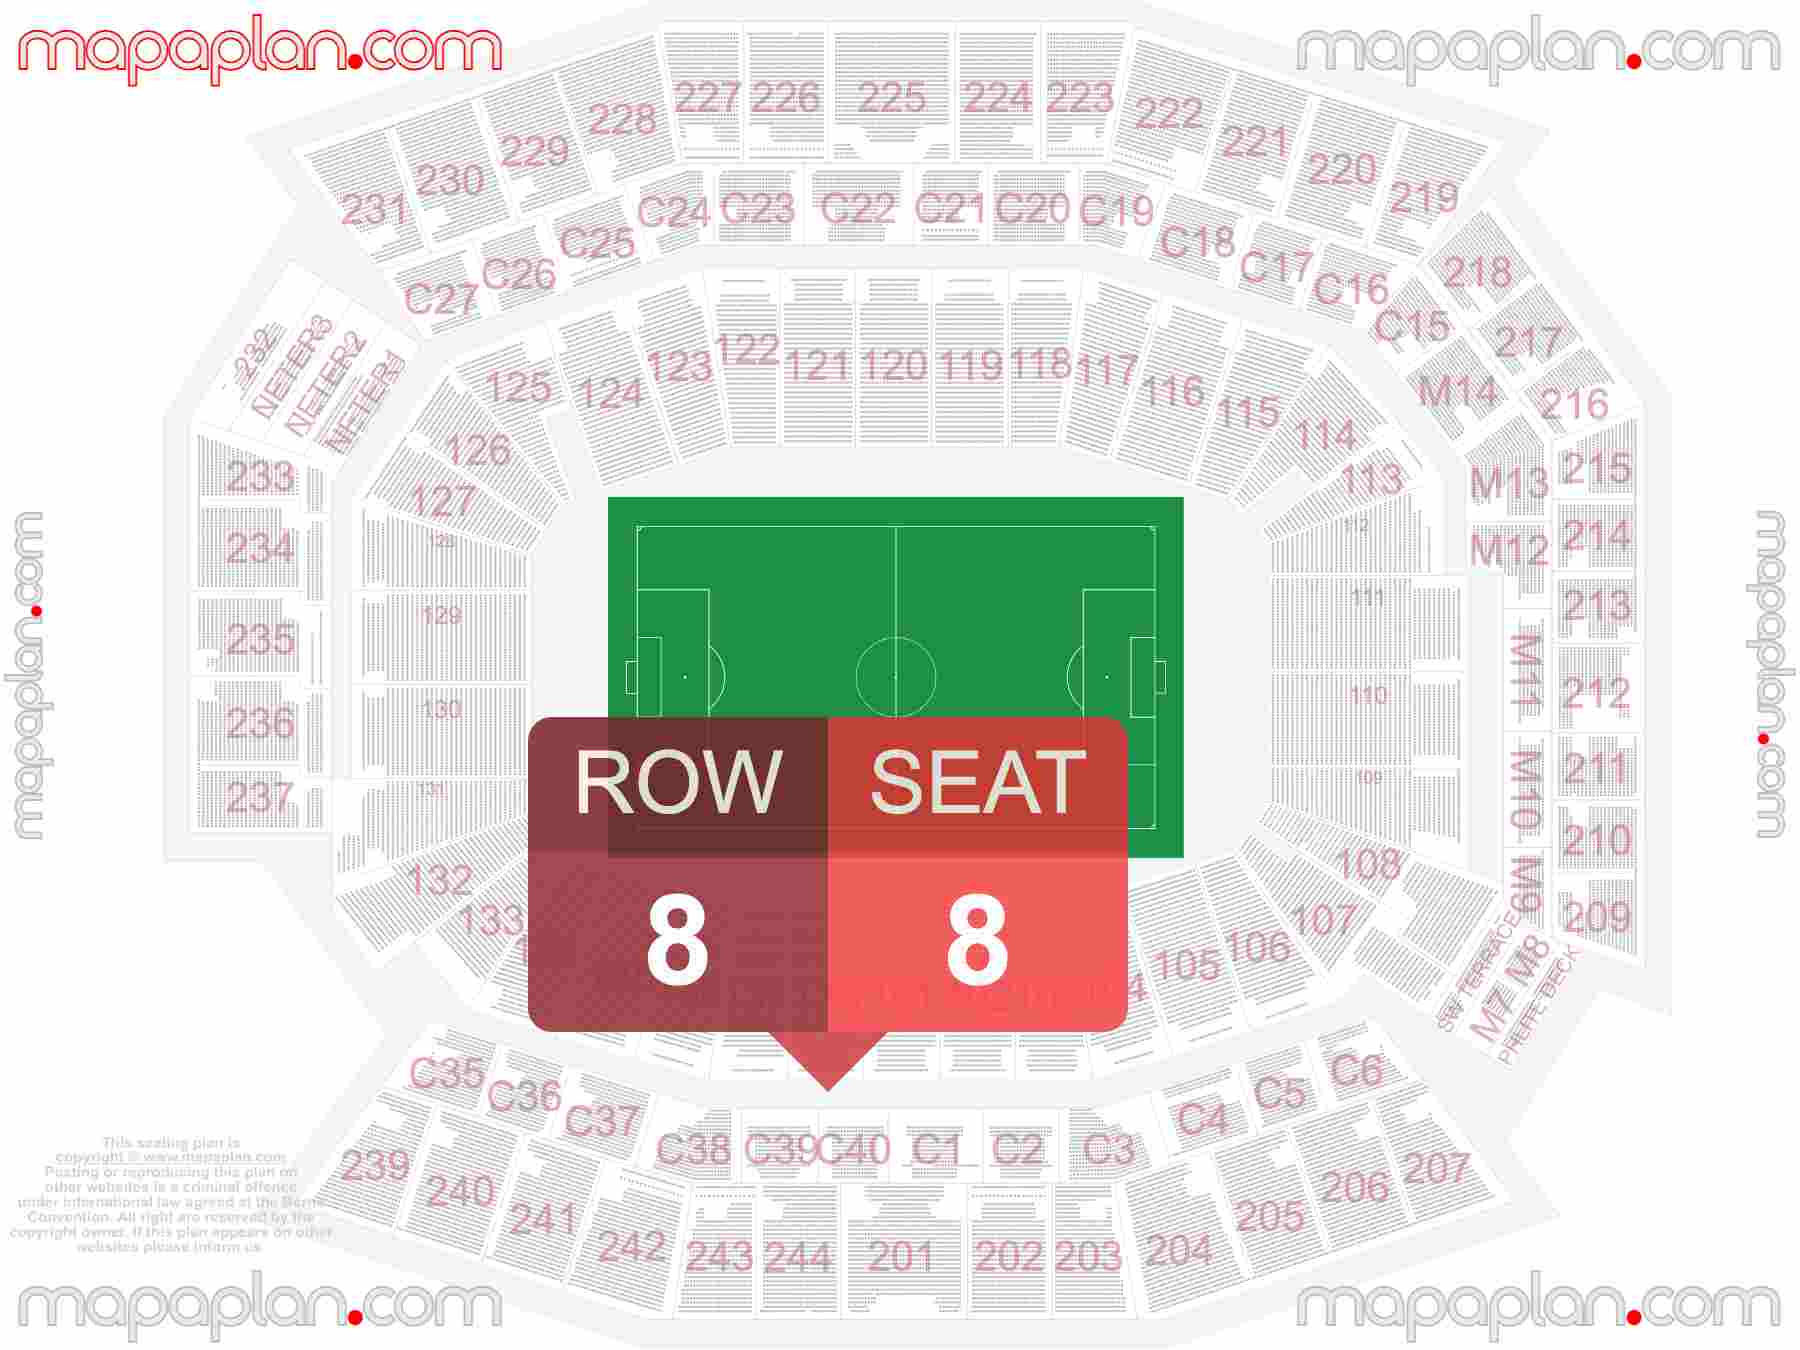 Philadelphia Lincoln Financial Field seating chart Soccer, Eagles football inside capacity view arrangement plan - Interactive virtual 3d best seats & rows detailed stadium image configuration layout